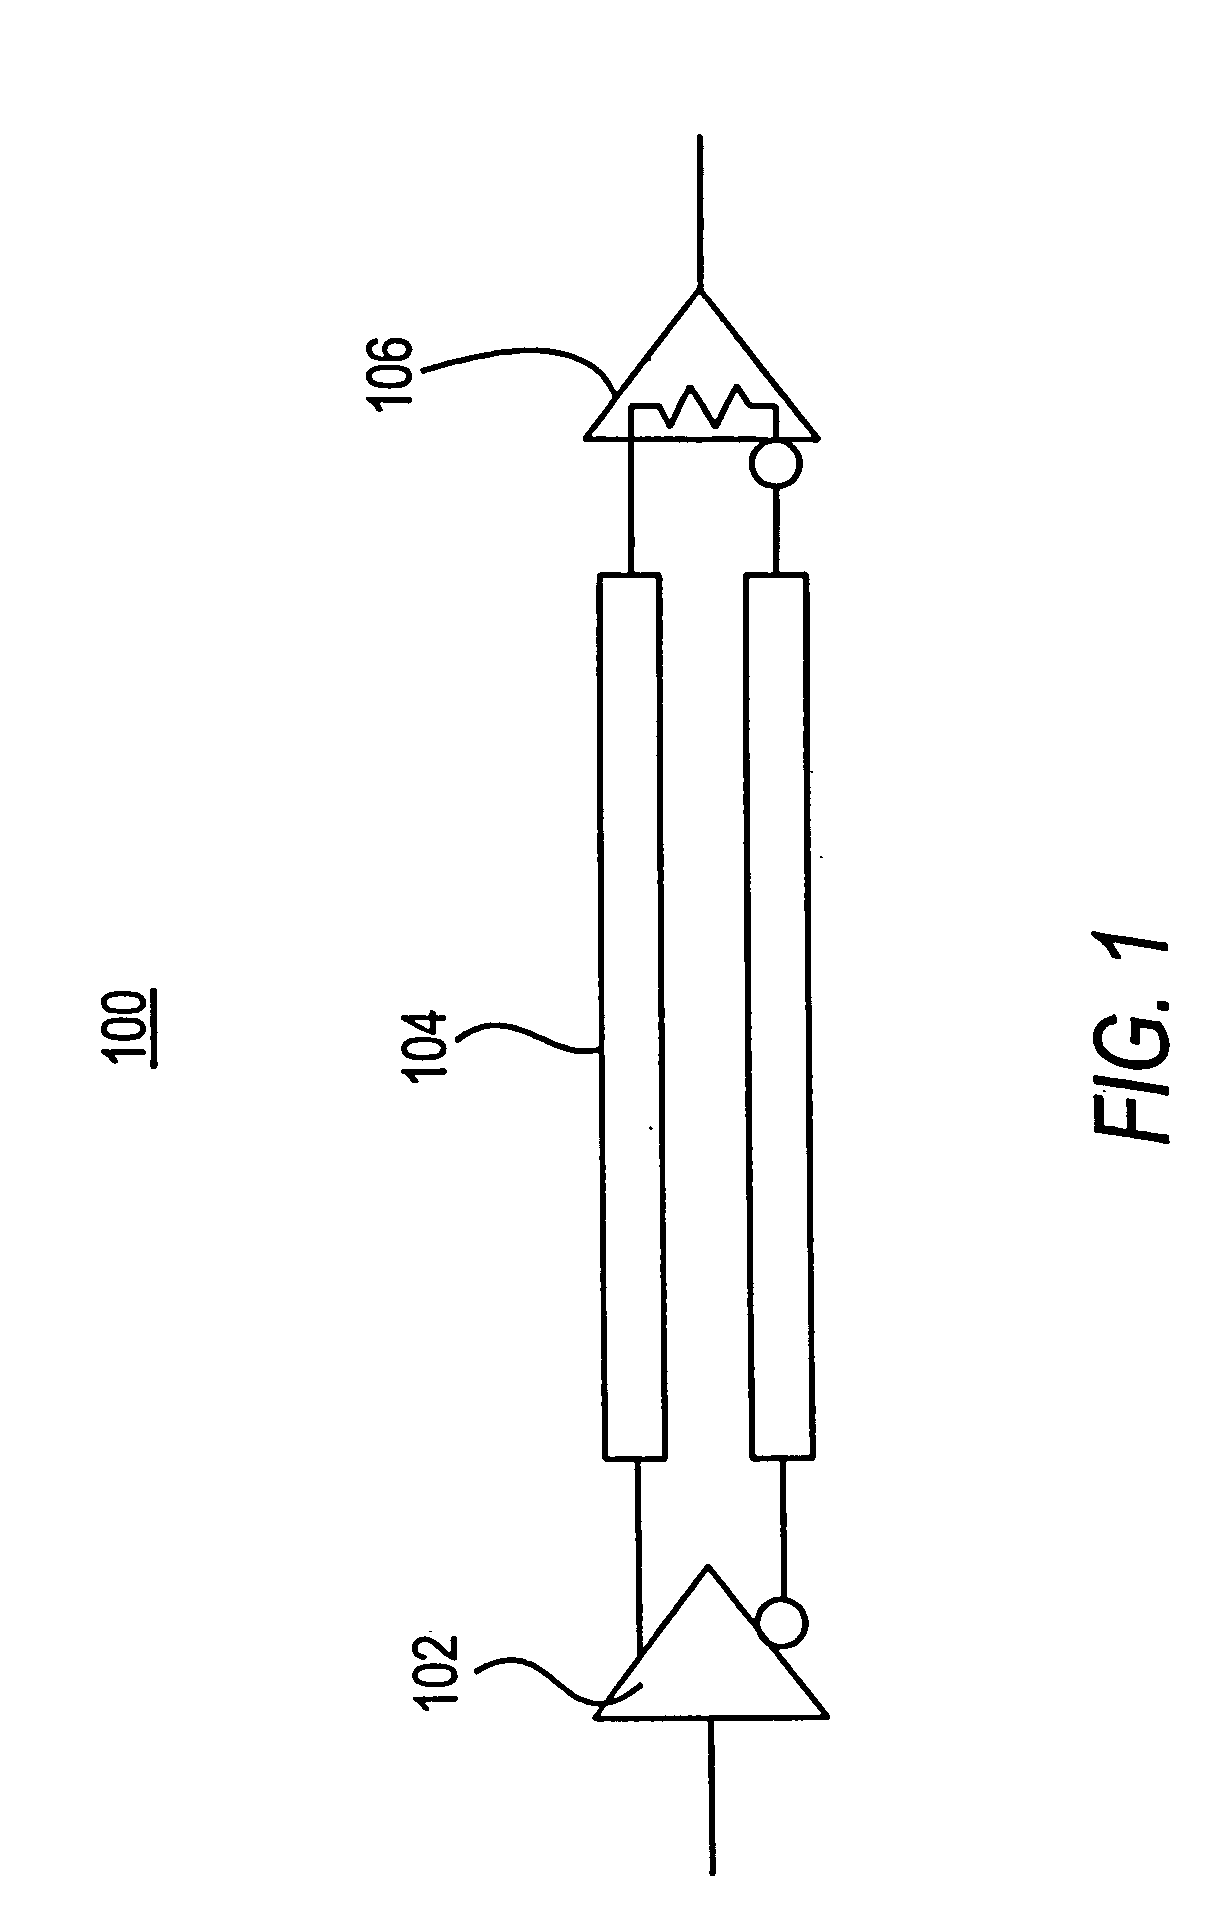 Circuitry and methods for programmably adjusting the duty cycles of serial data signals